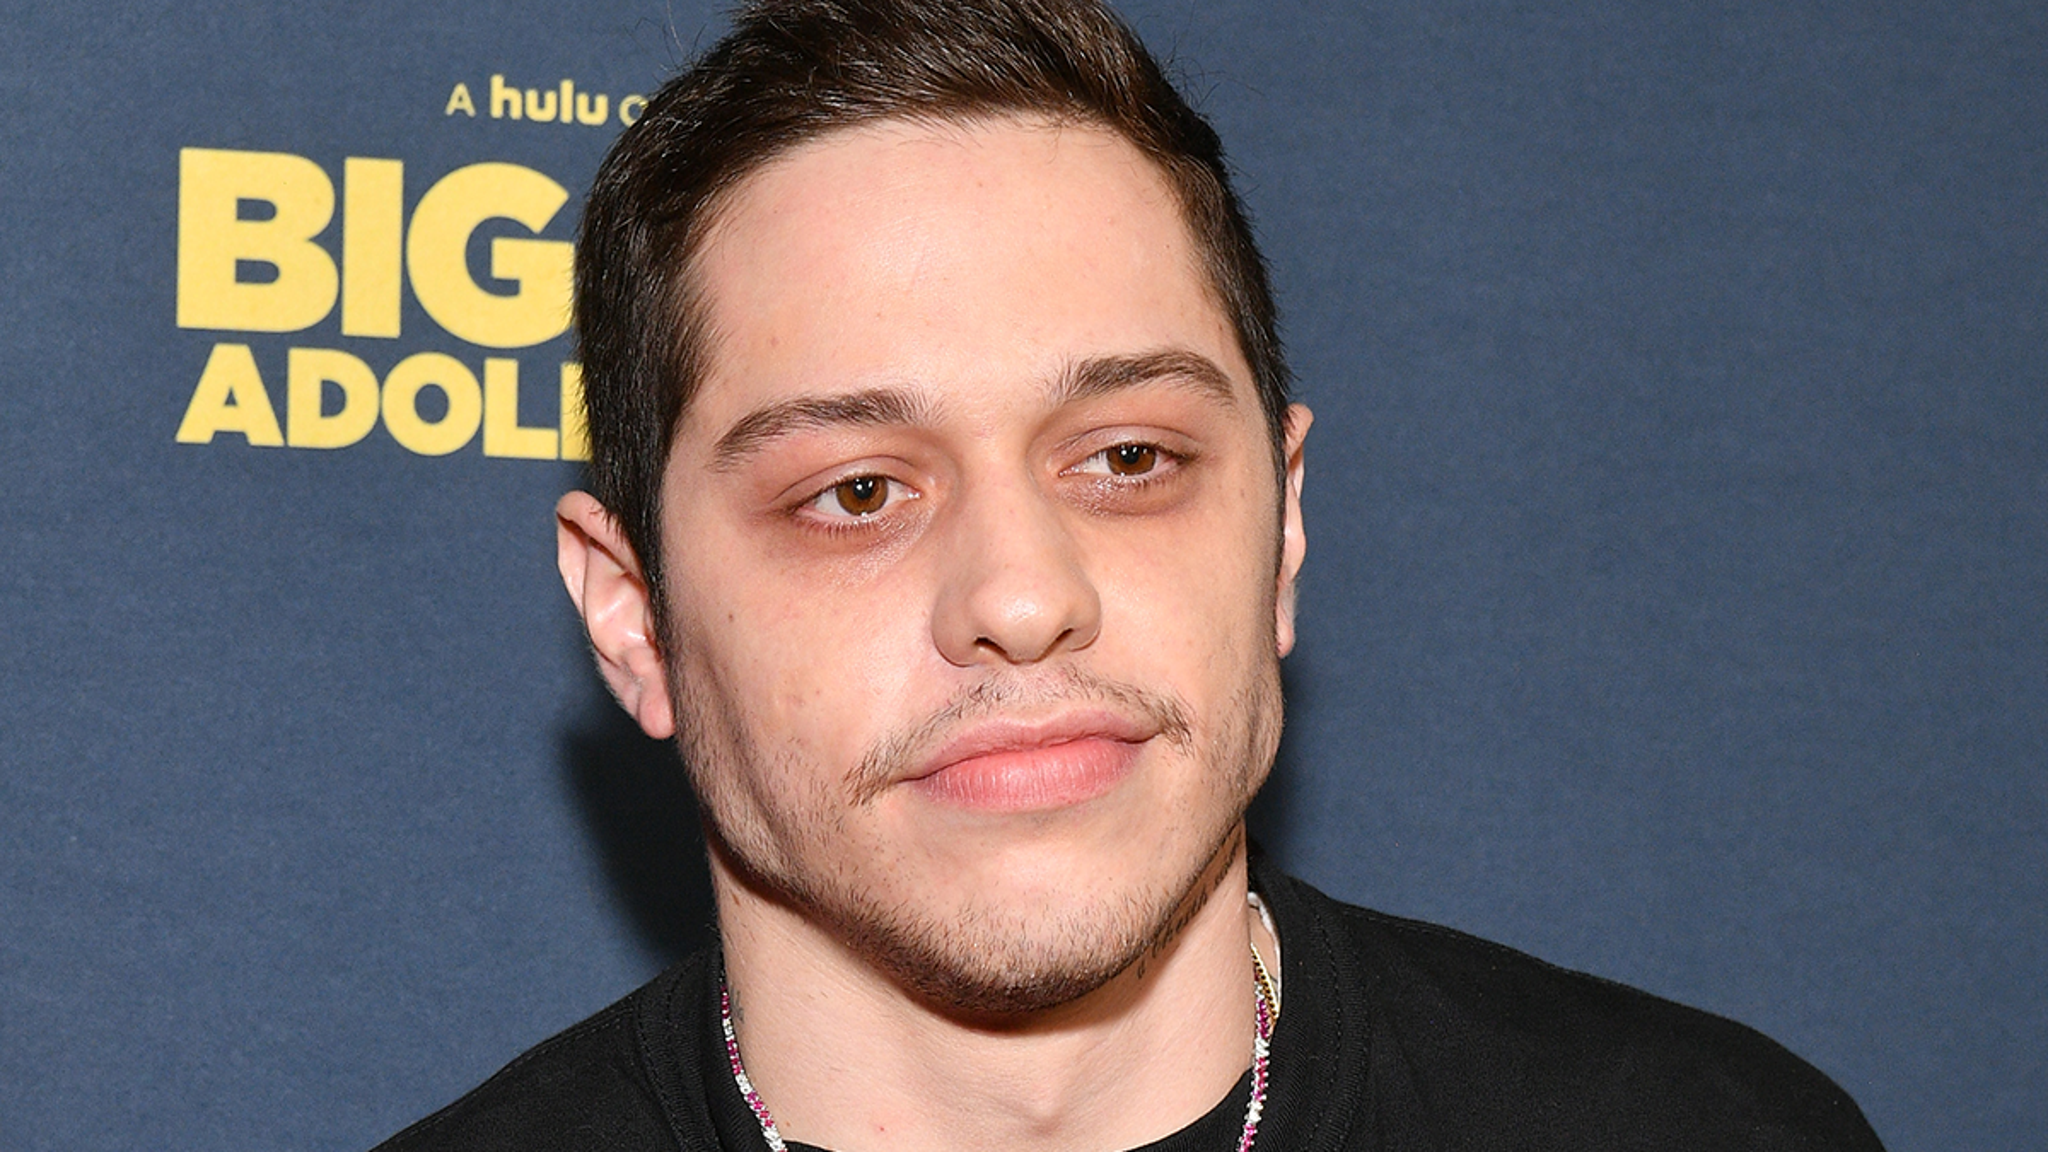 Pete Davidson In Rehab, Struggling With Mental Health